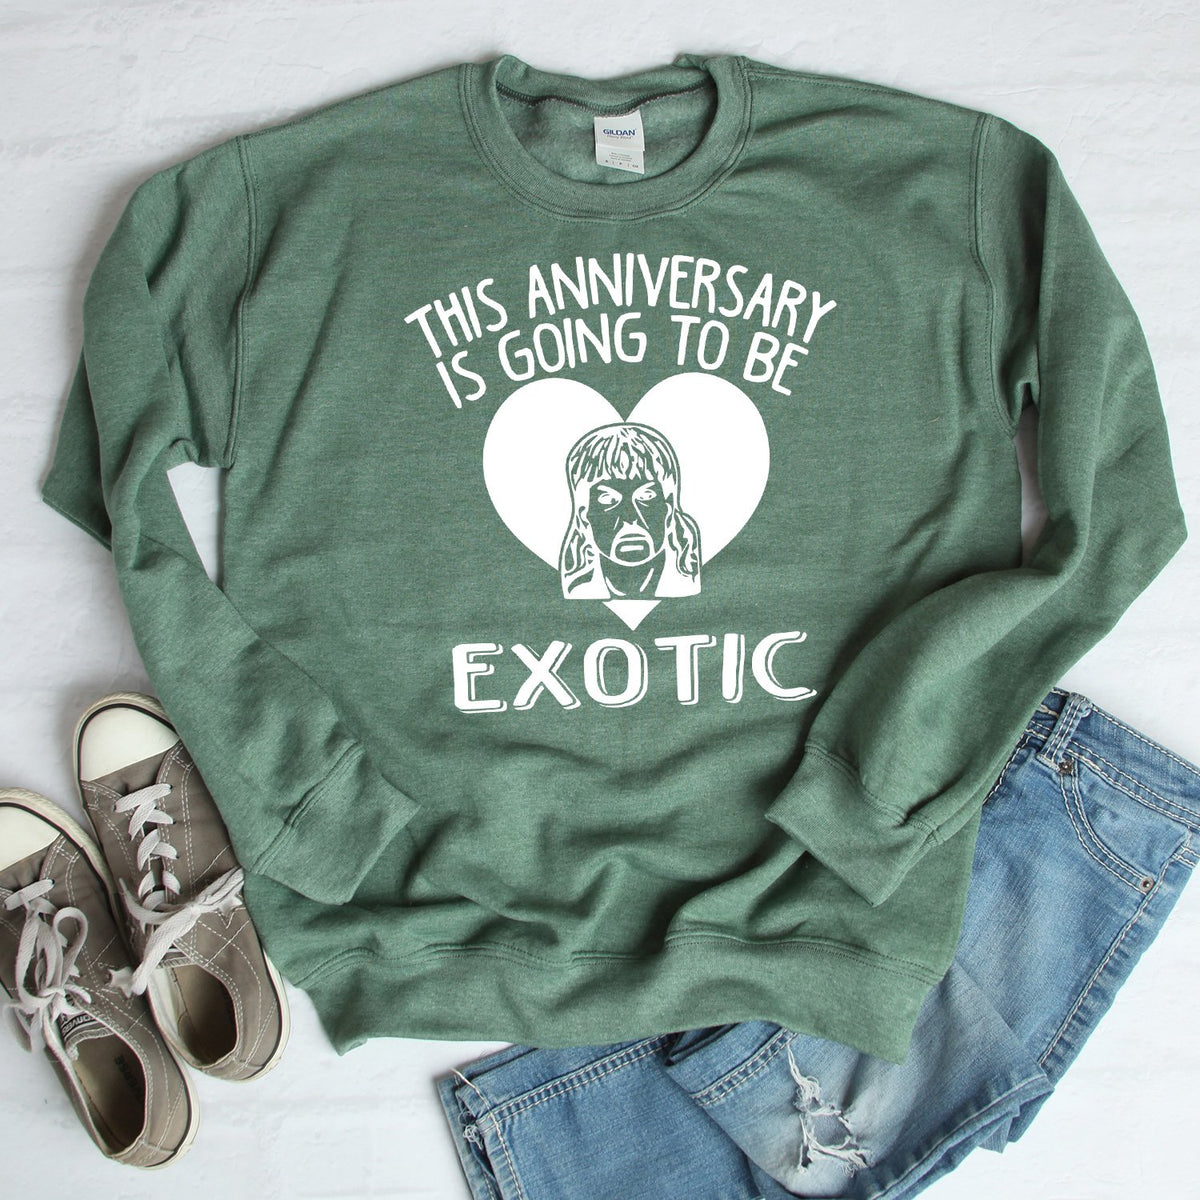 This Anniversary is Going To Be Exotic - Long Sleeve Heavy Crewneck Sweatshirt